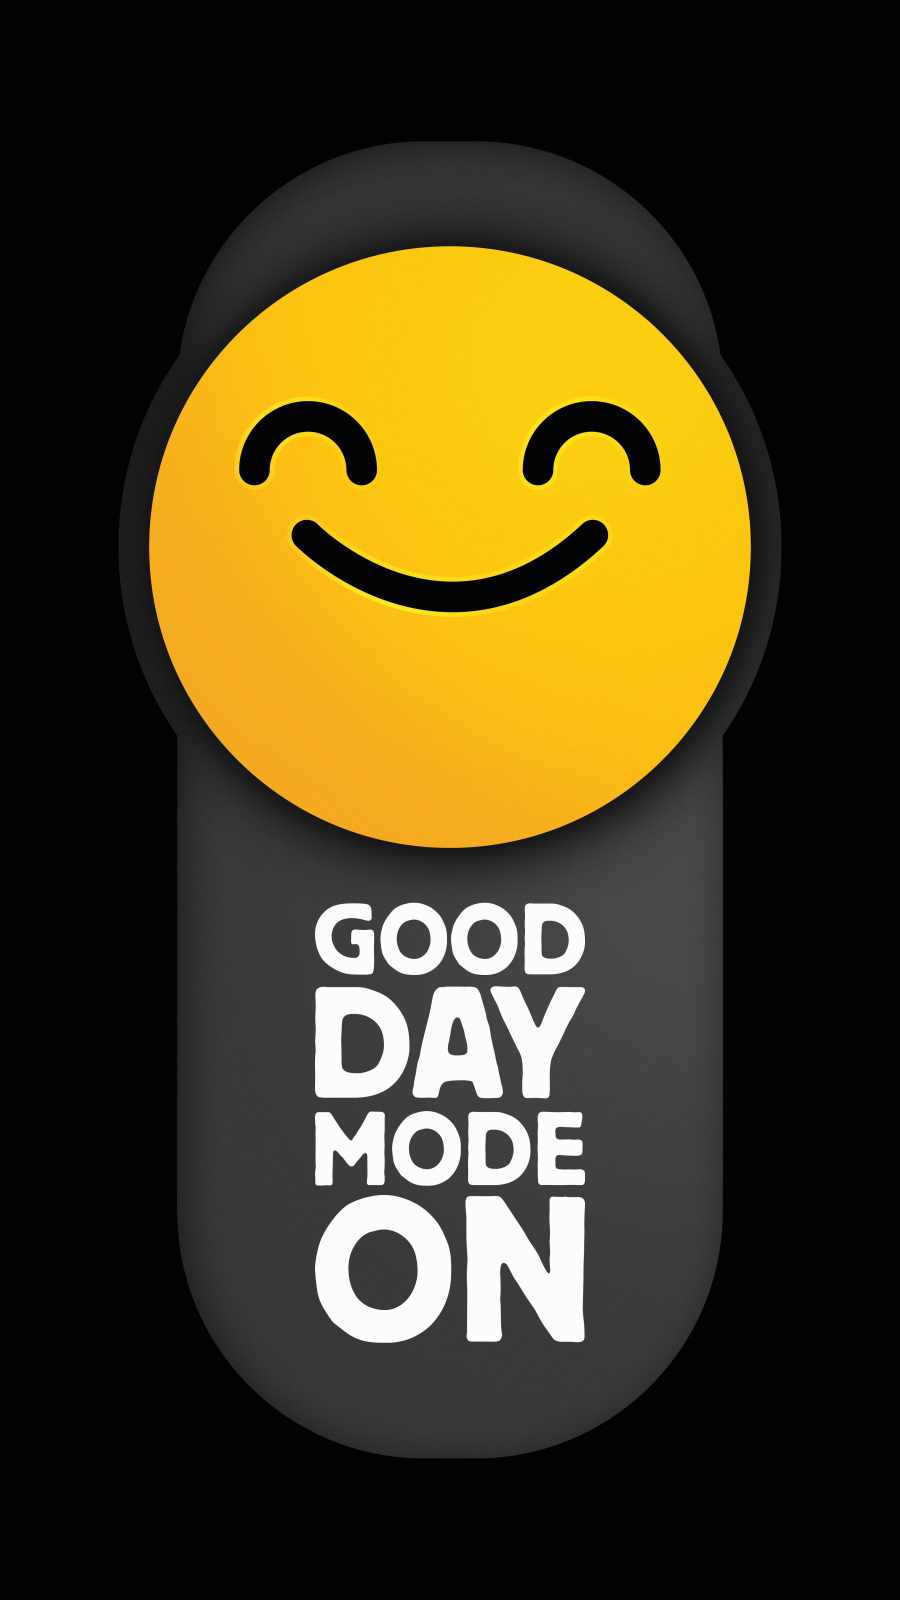 Good Day Mode ON IPhone Wallpaper - IPhone Wallpapers : iPhone Wallpapers